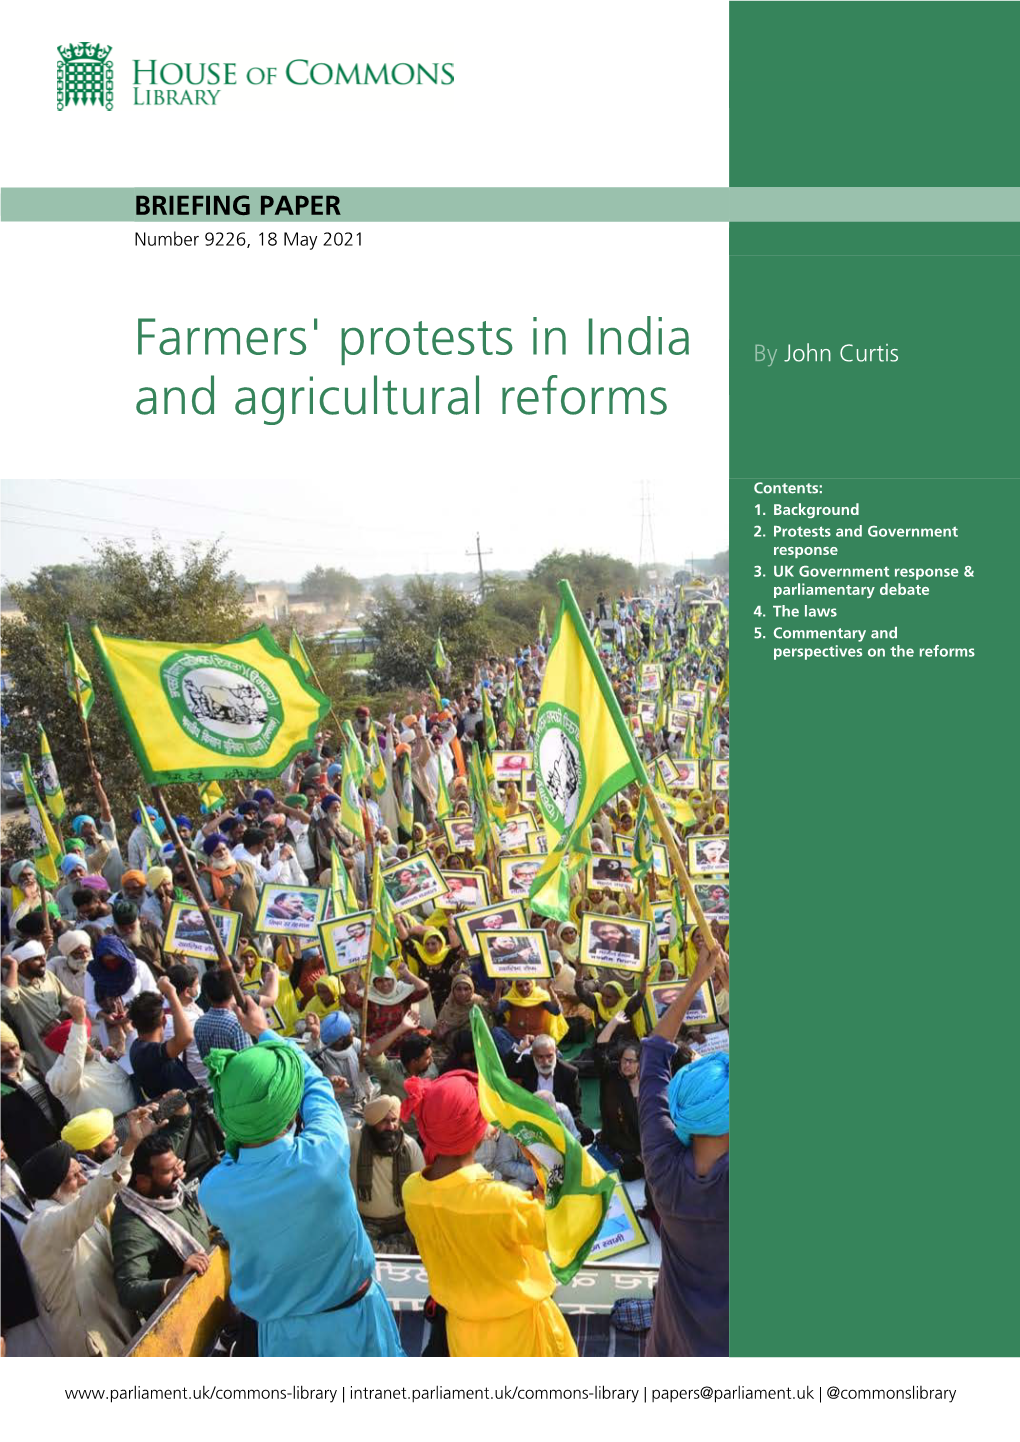 Farmers' Protests in India and Agricultural Reforms